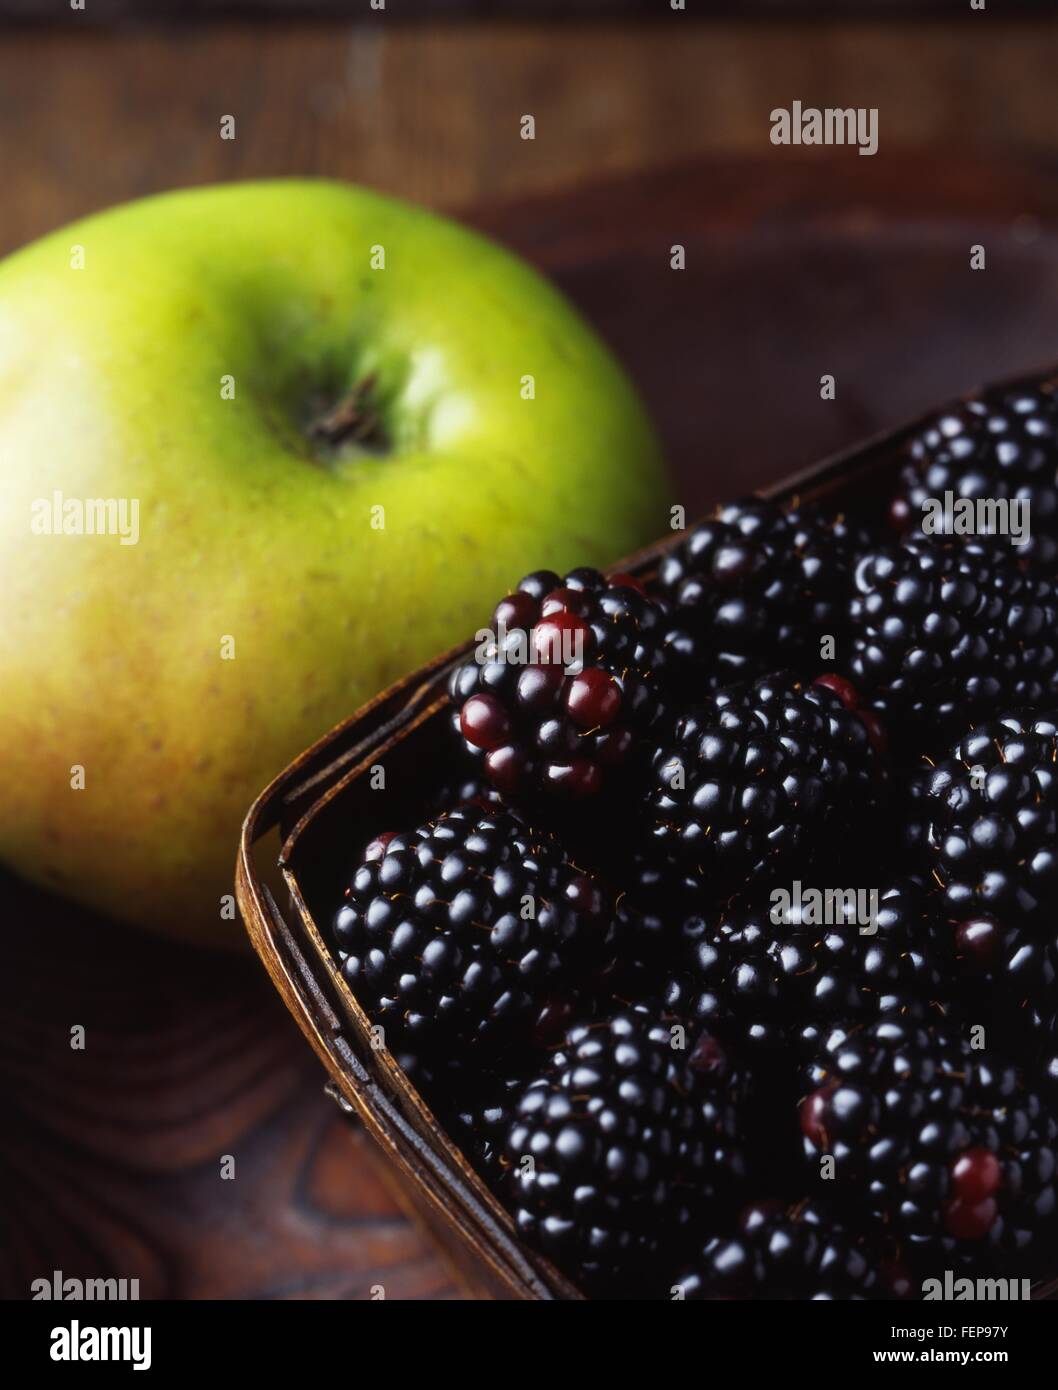 Close up of green apple and blackberries in wooden basket Stock Photo